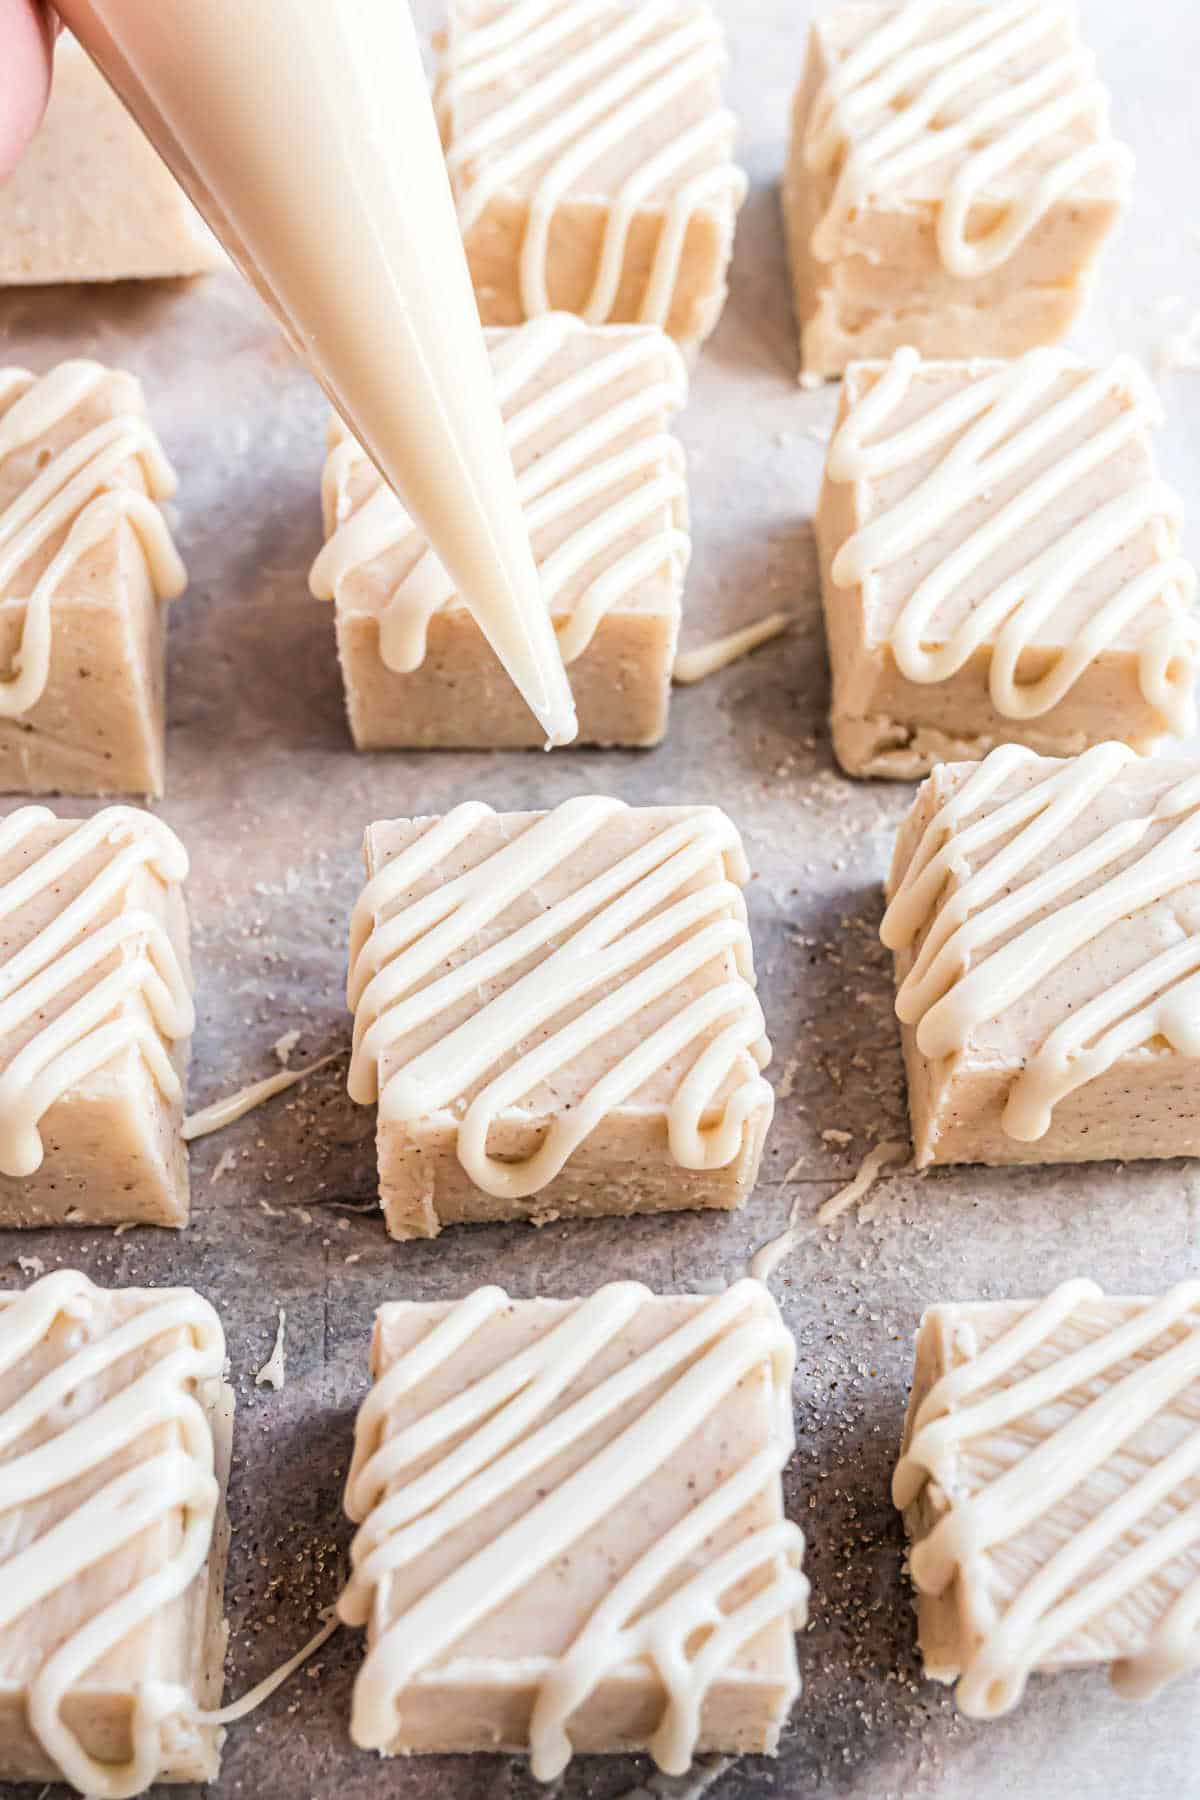 Icing being drizzled on cinnamon roll fudge.